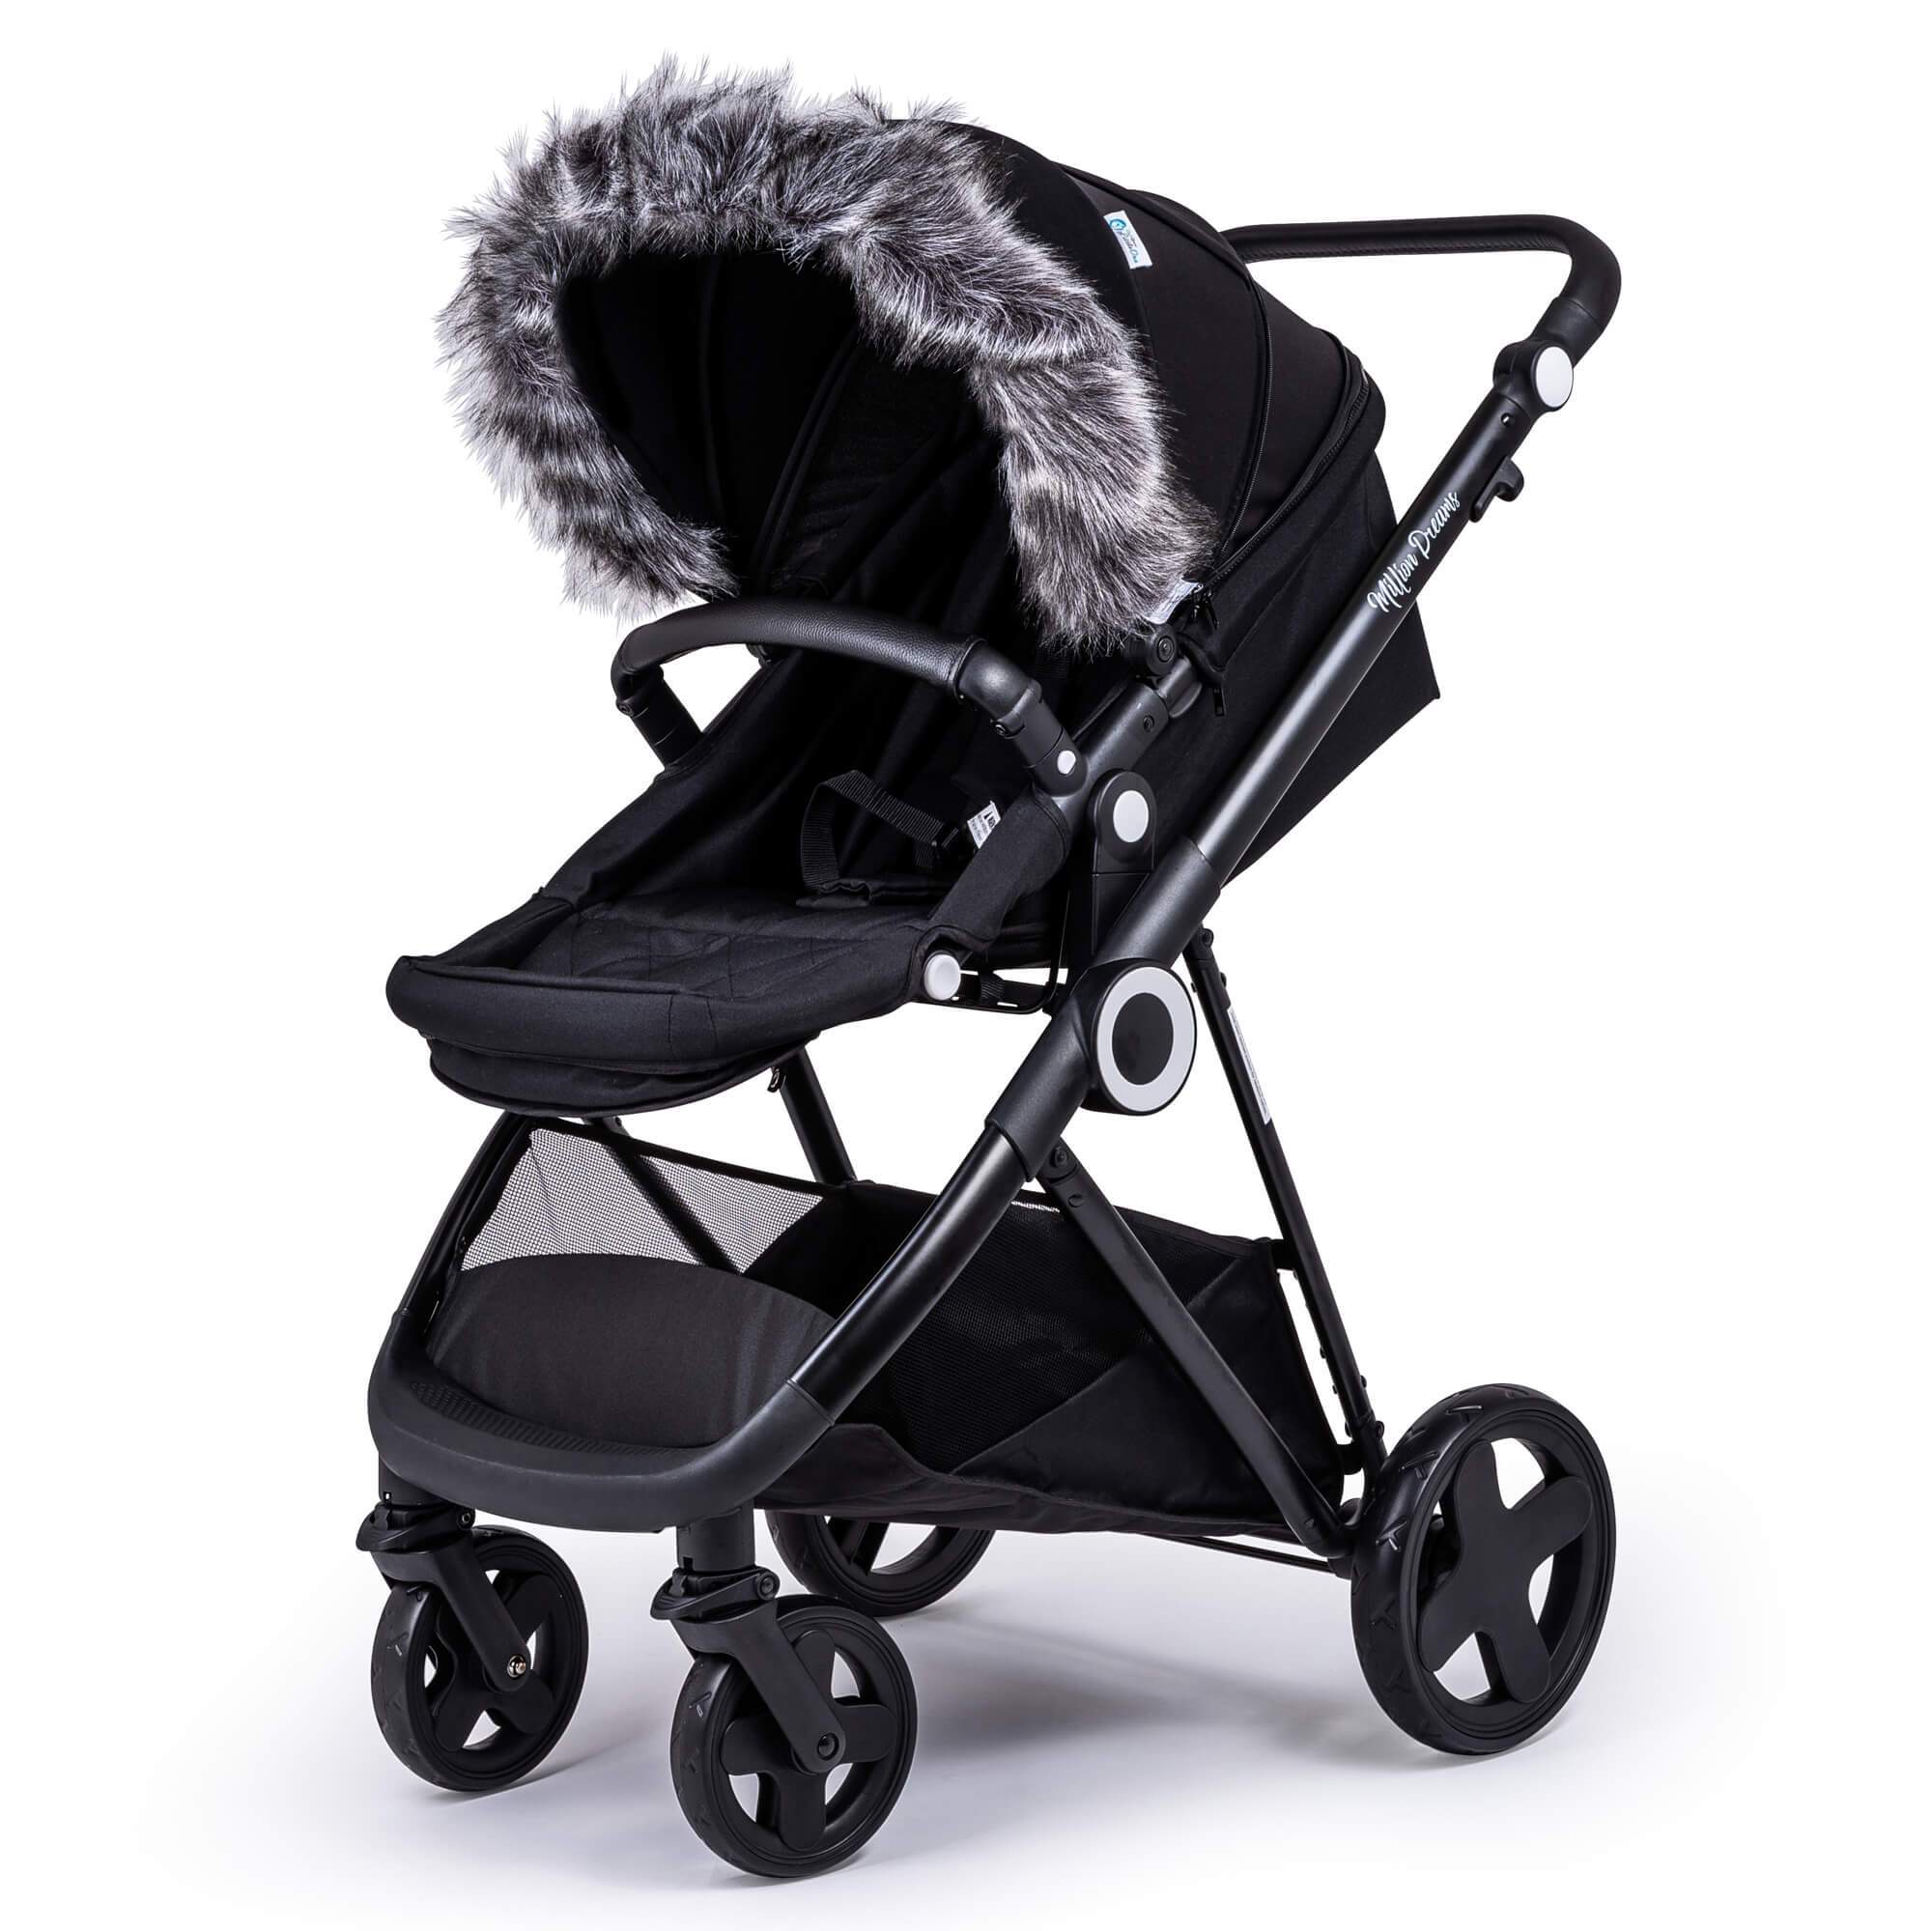 Pram Fur Hood Trim Attachment for Pushchair Compatible with Maxi Cosi - Dark Grey / Fits All Models | For Your Little One